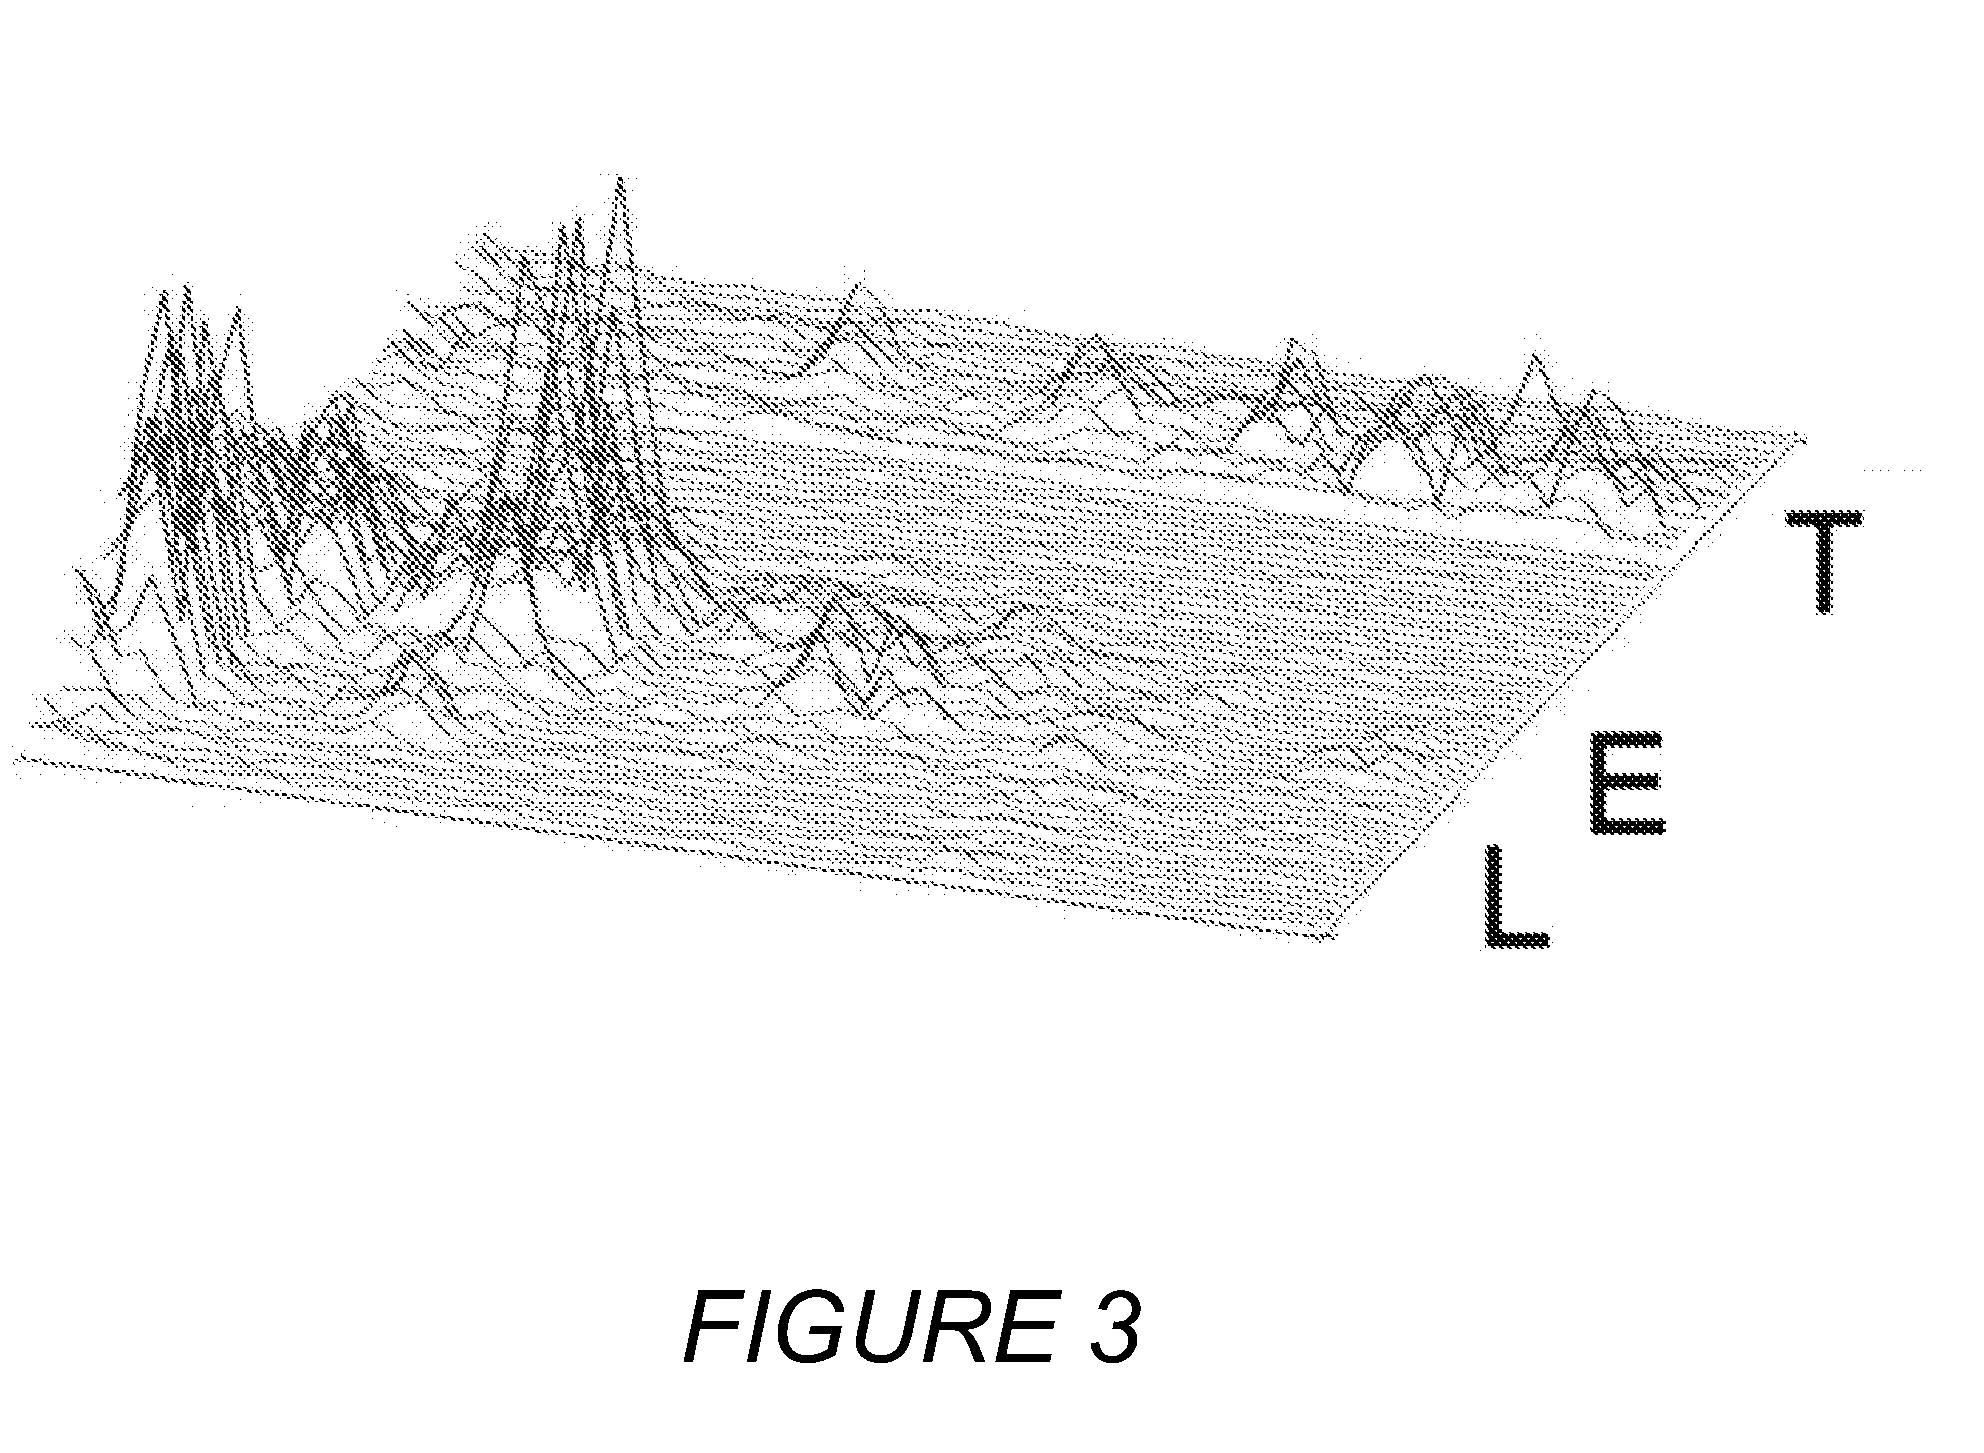 Adaptively filtering a microphone signal responsive to vibration sensed in a user's face while speaking